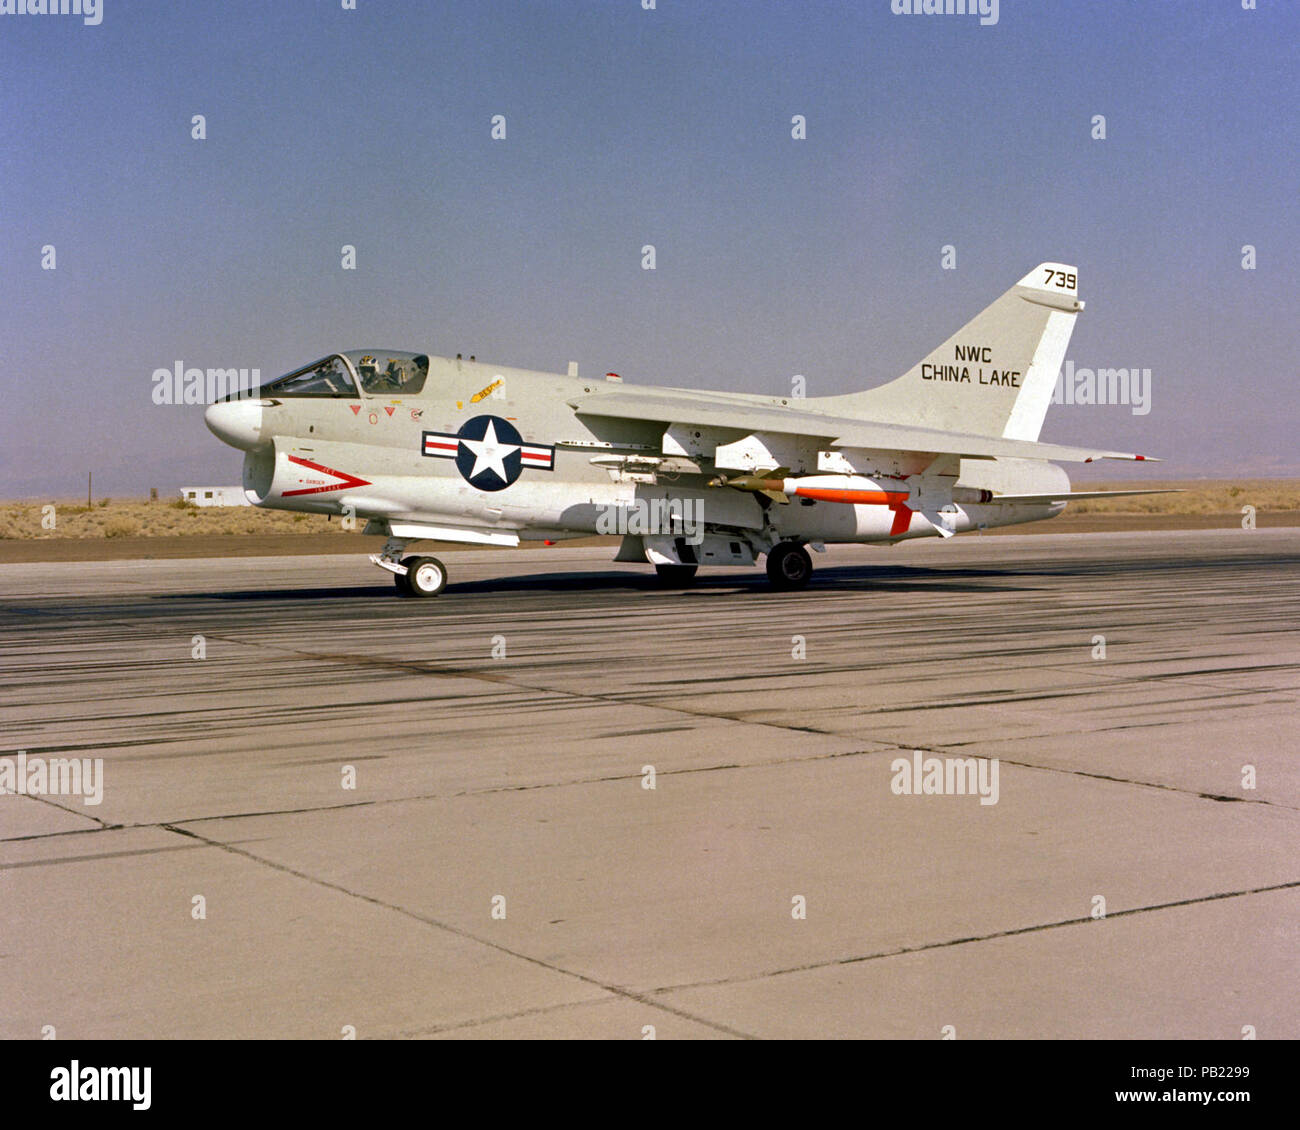 A-7C Corsair II with laser-guided bomb at the Naval Weapons Center China Lake on 6 October 1980. A left front ground view of an A-7C Corsair II aircraft with a Skipper Laser-Guided Bomb (LGB) mounted under its wing. Stock Photo